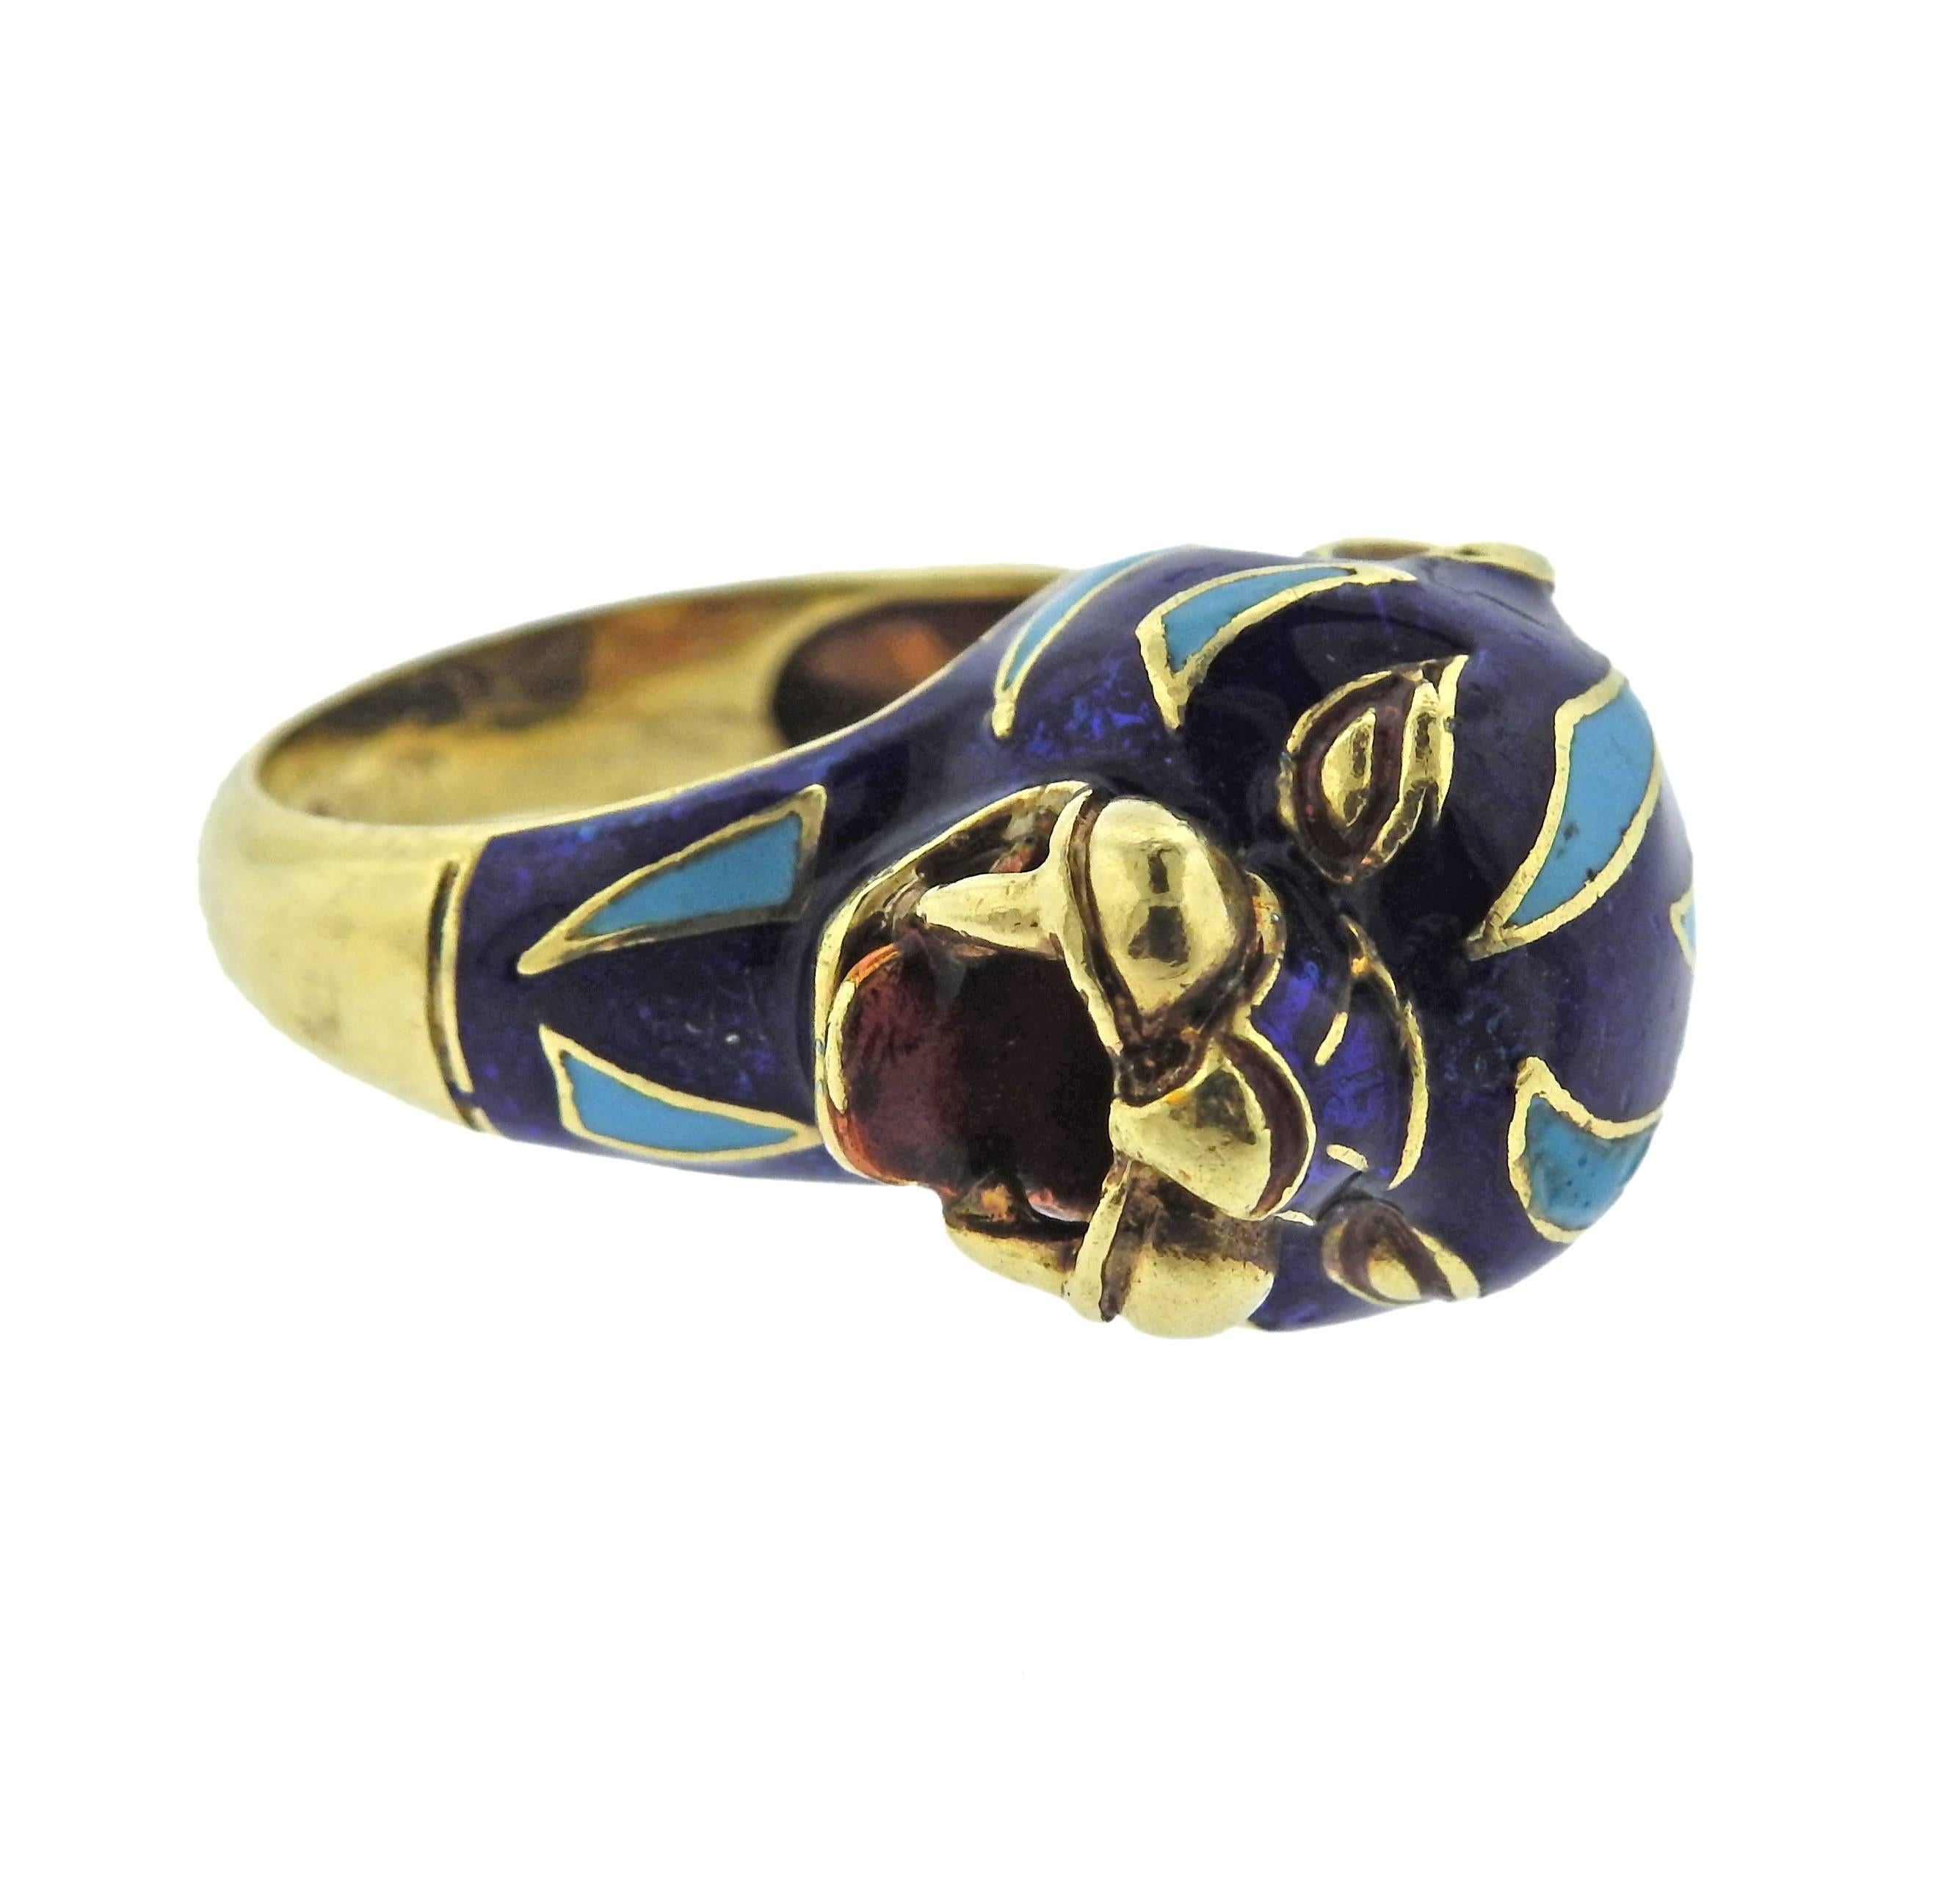  18k yellow gold enamel decorated ring, designed by Frascarolo. Ring size - 6, ring top - 16mm x 21mm x 15mm, weighs 14.1 grams. Marked: Modele Depose 7560, Maker's mark.